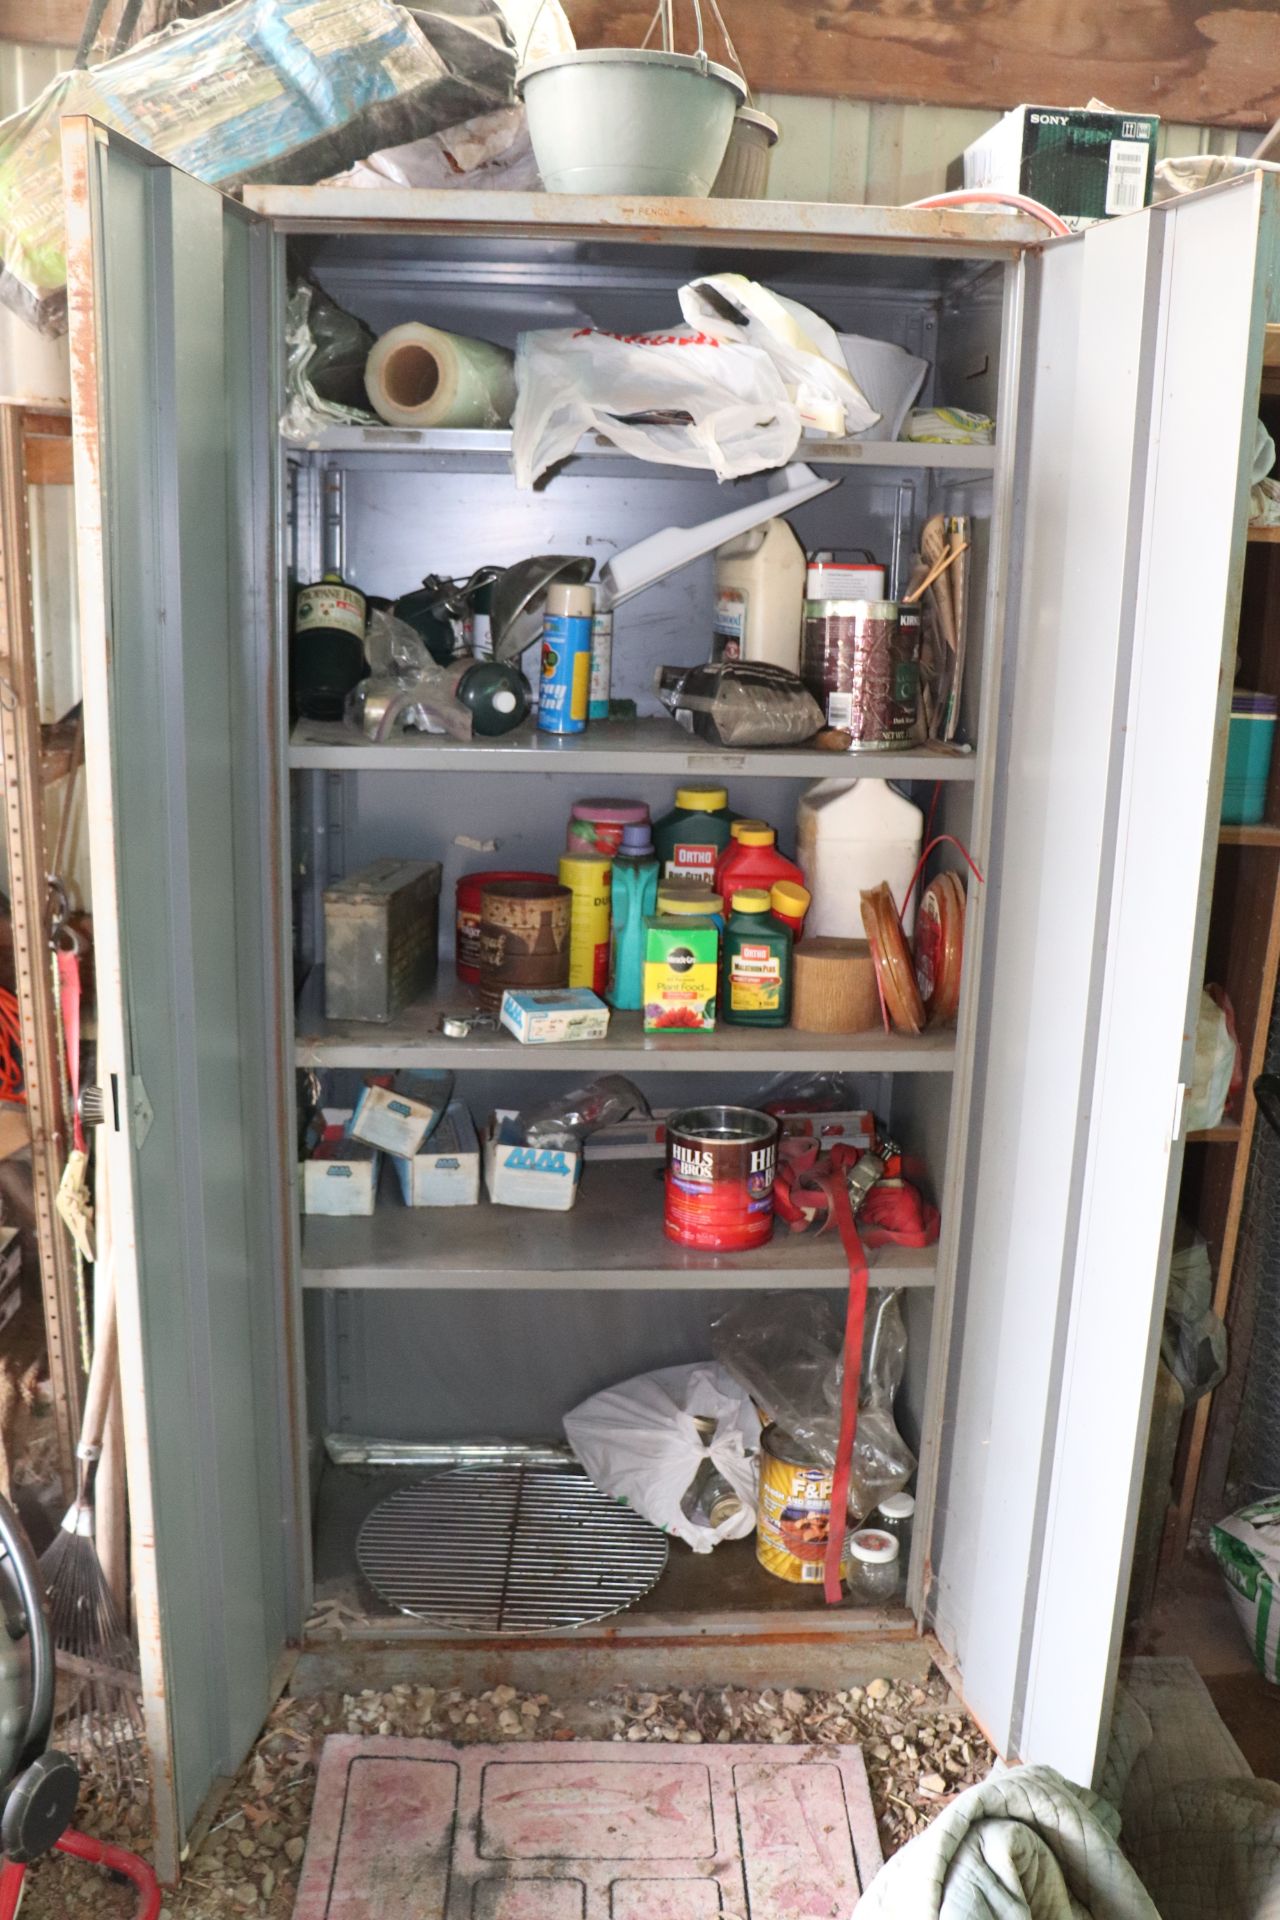 Cabinet and contents